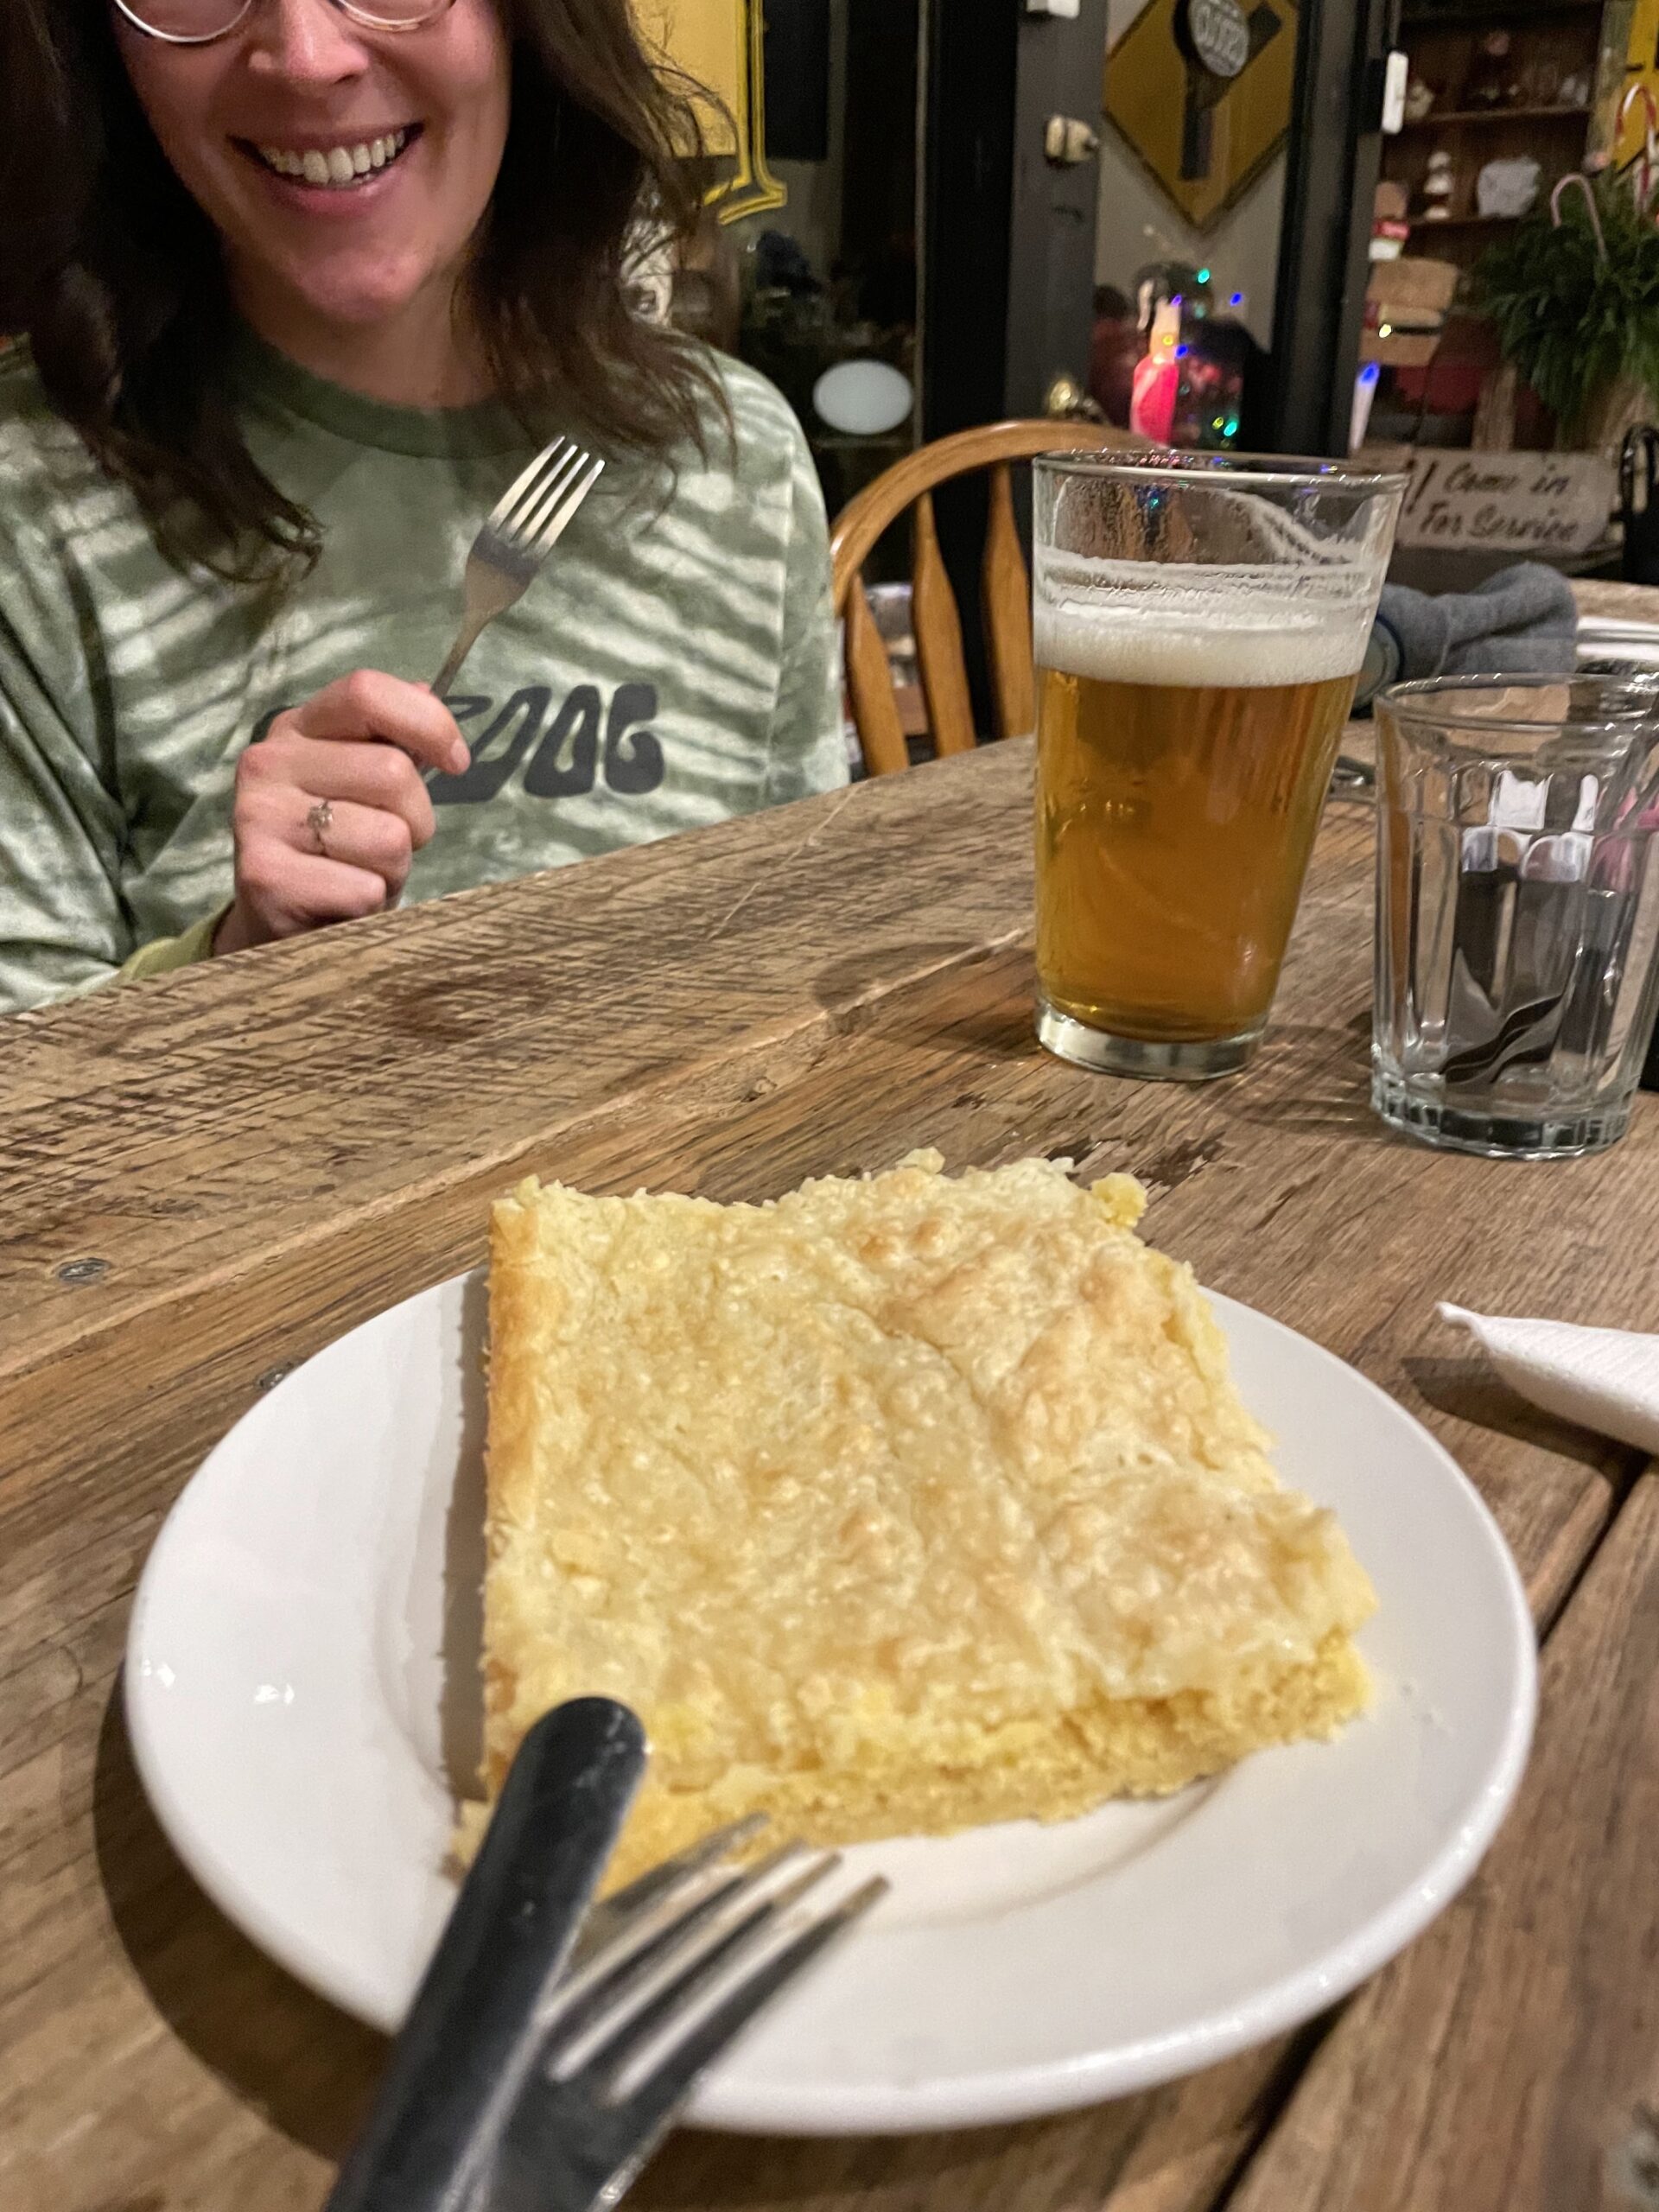 The author is excited to indulge in gooey butter cake and a strong IPA.